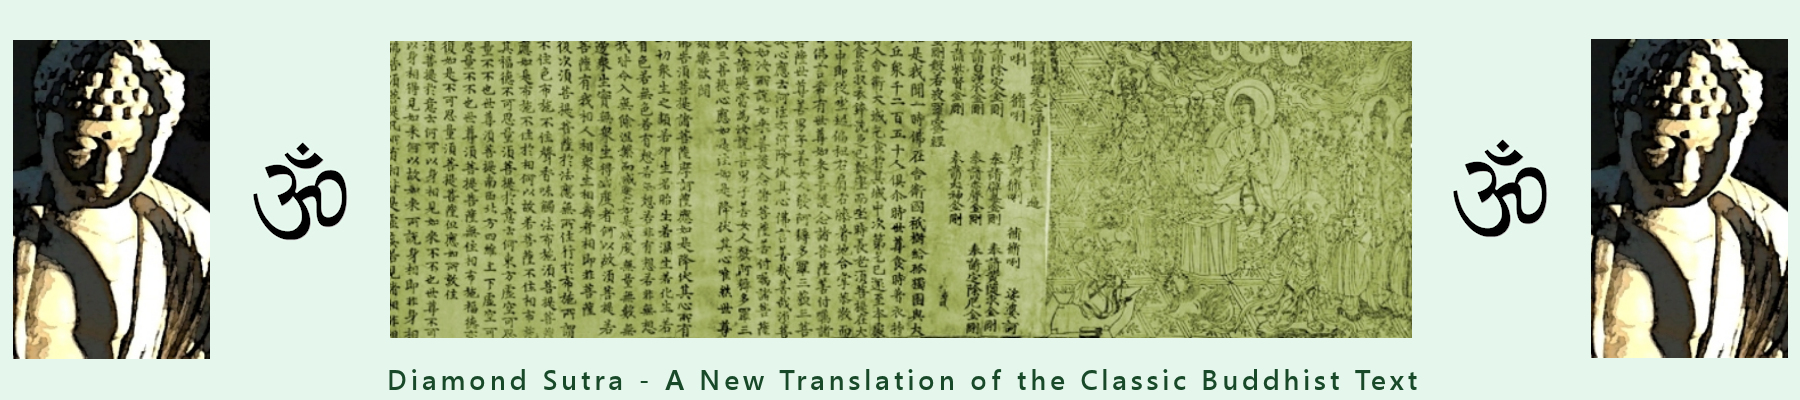 Diamond Sutra - A New Translation of the Classic Buddhist Text